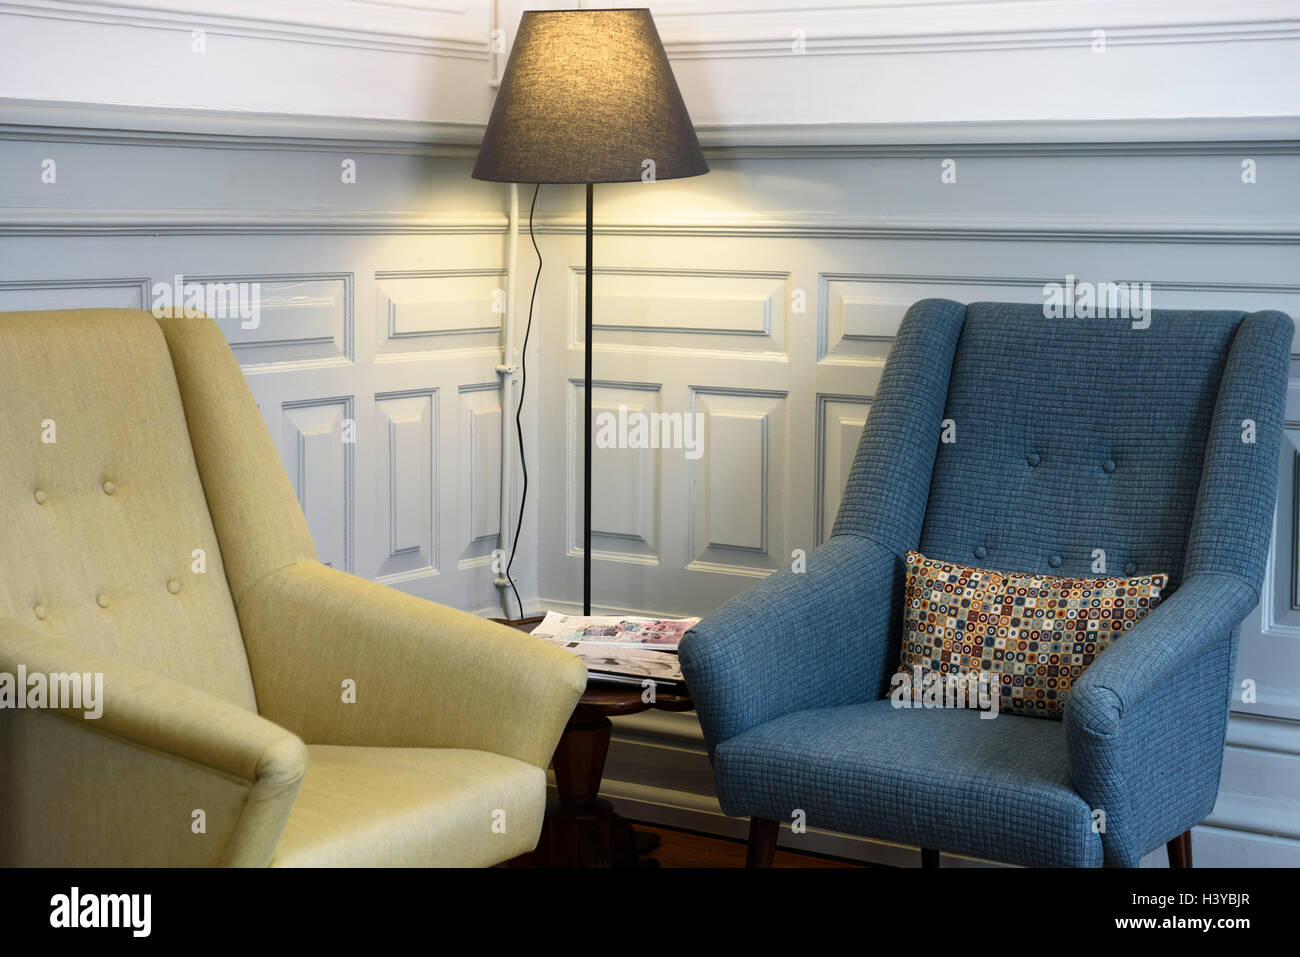 Two armchairs and a floor lamp on a reading corner Stock Photo